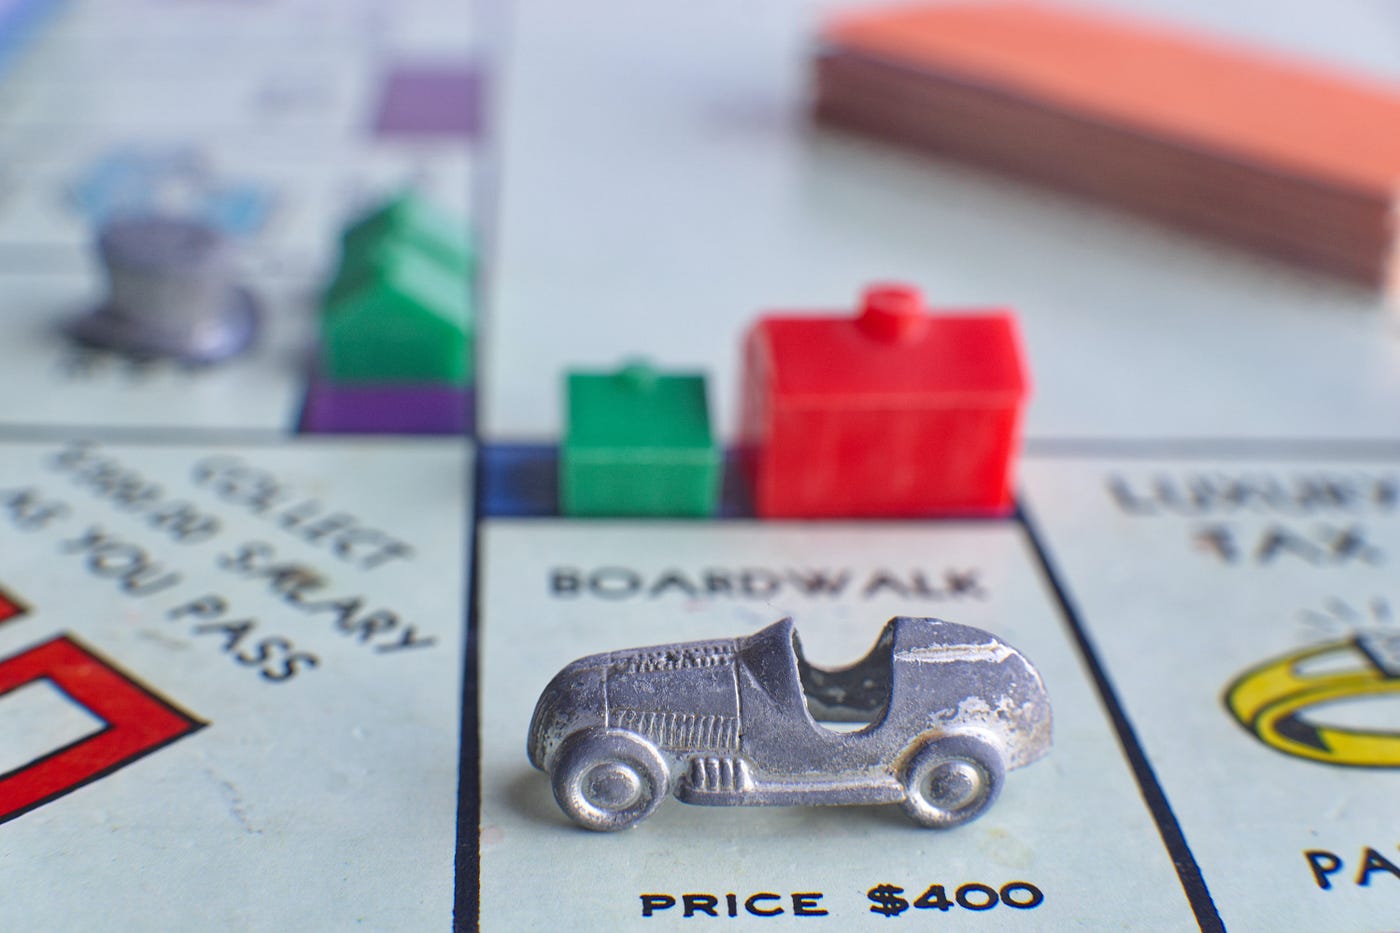 5 Lessons in Finance and Investing From Monopoly